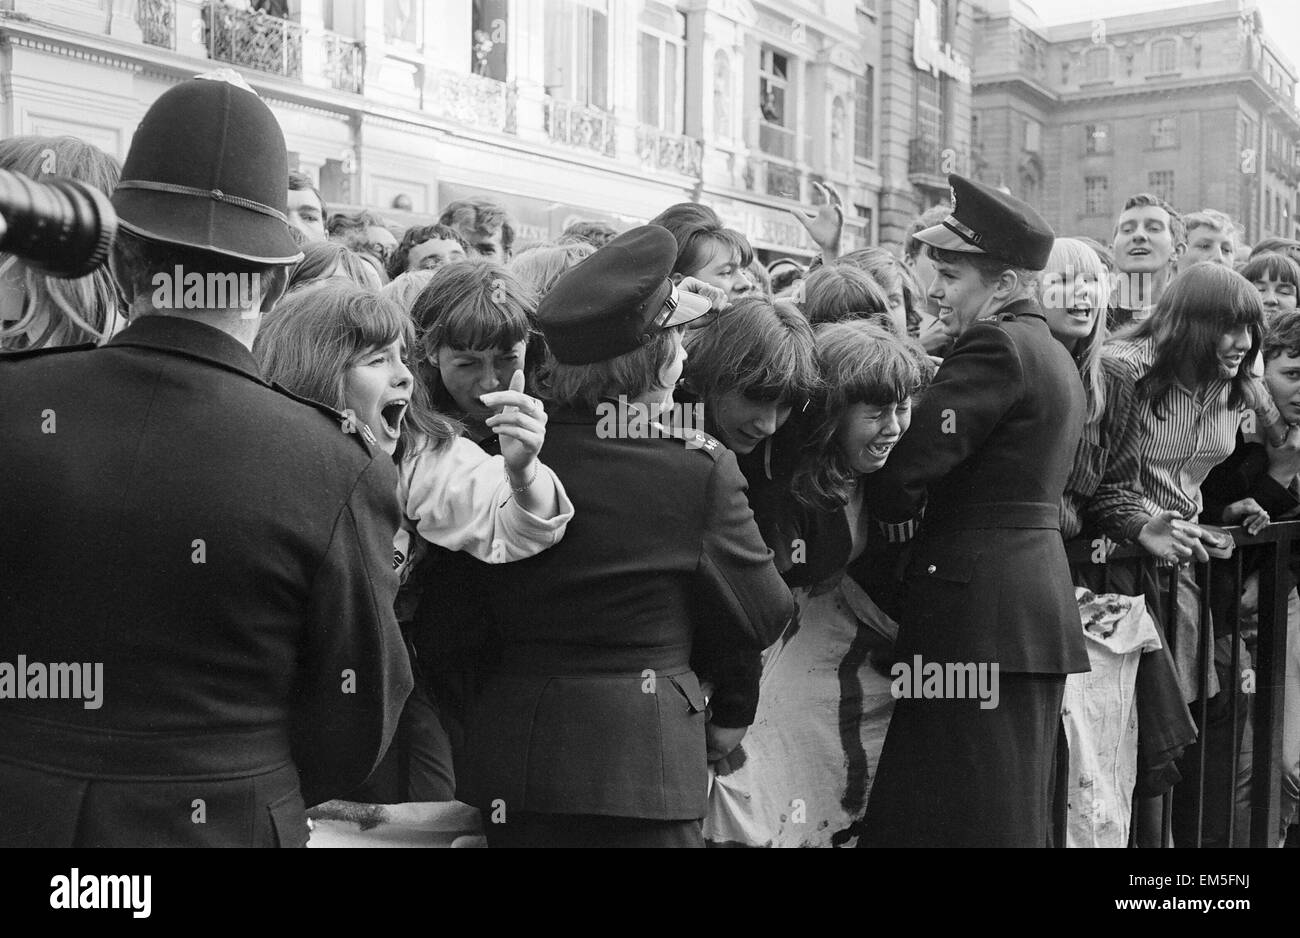 Royal premiere of The Beatles new film Help! at the London Pavillion in Piccadilly circus London 29th July 1965. Stock Photo